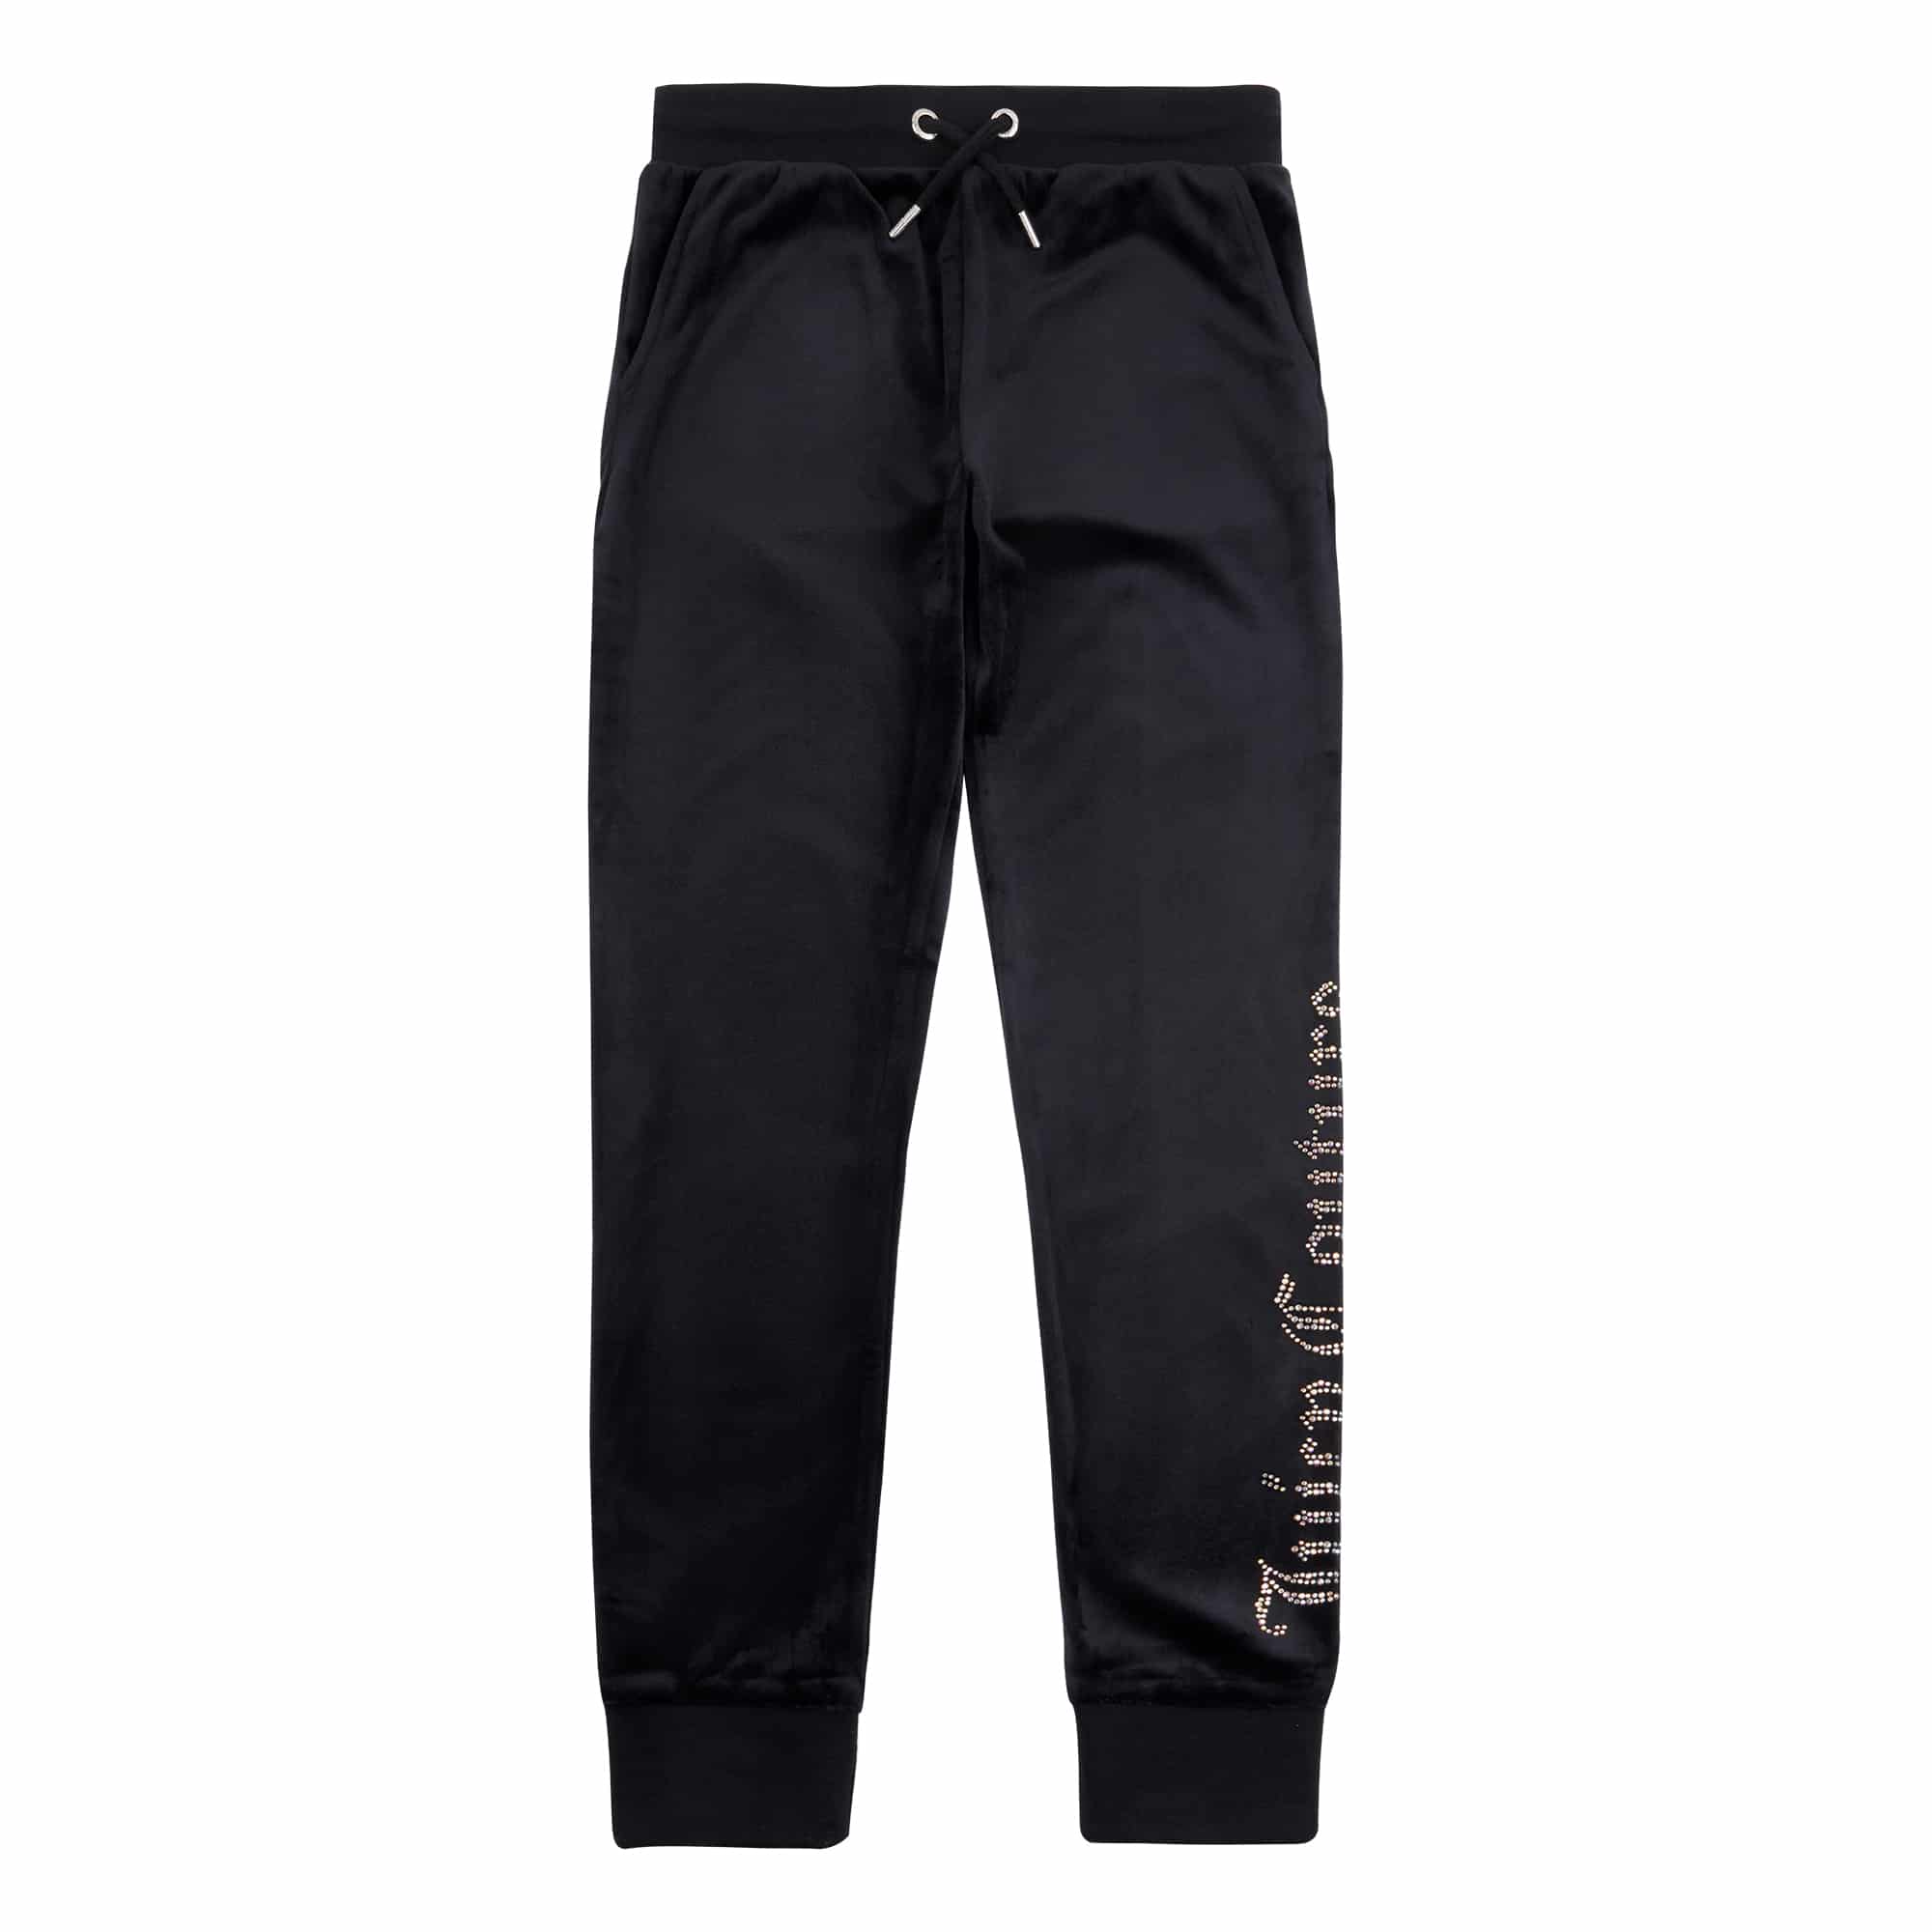 Juicy Couture girls black tracksuit bottoms with embellished logo side